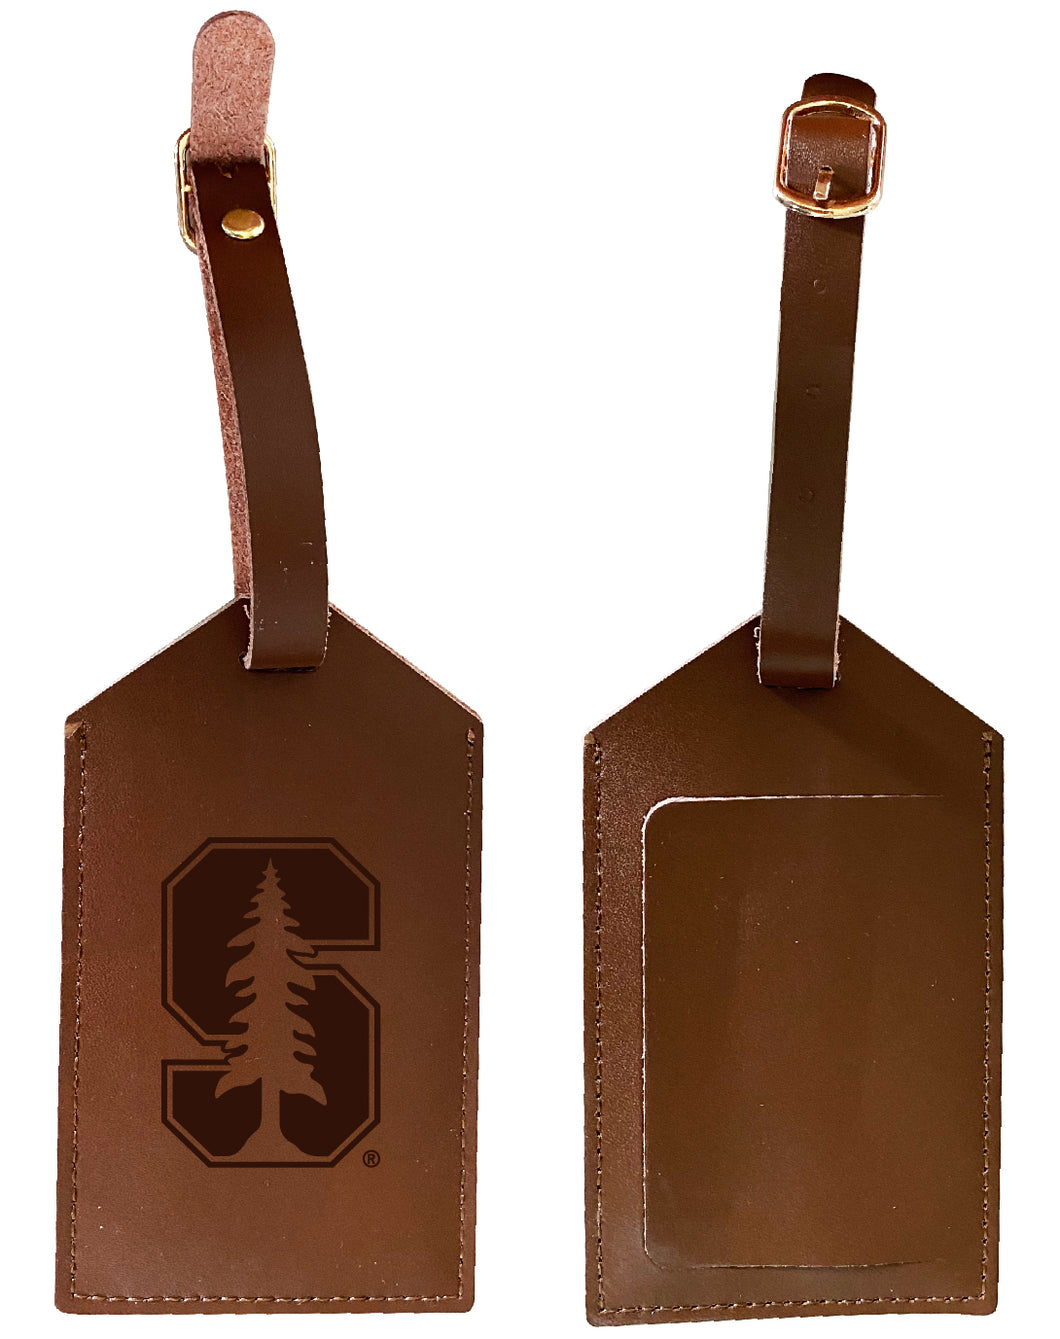 Elegant Stanford University NCAA Leather Luggage Tag with Engraved Logo